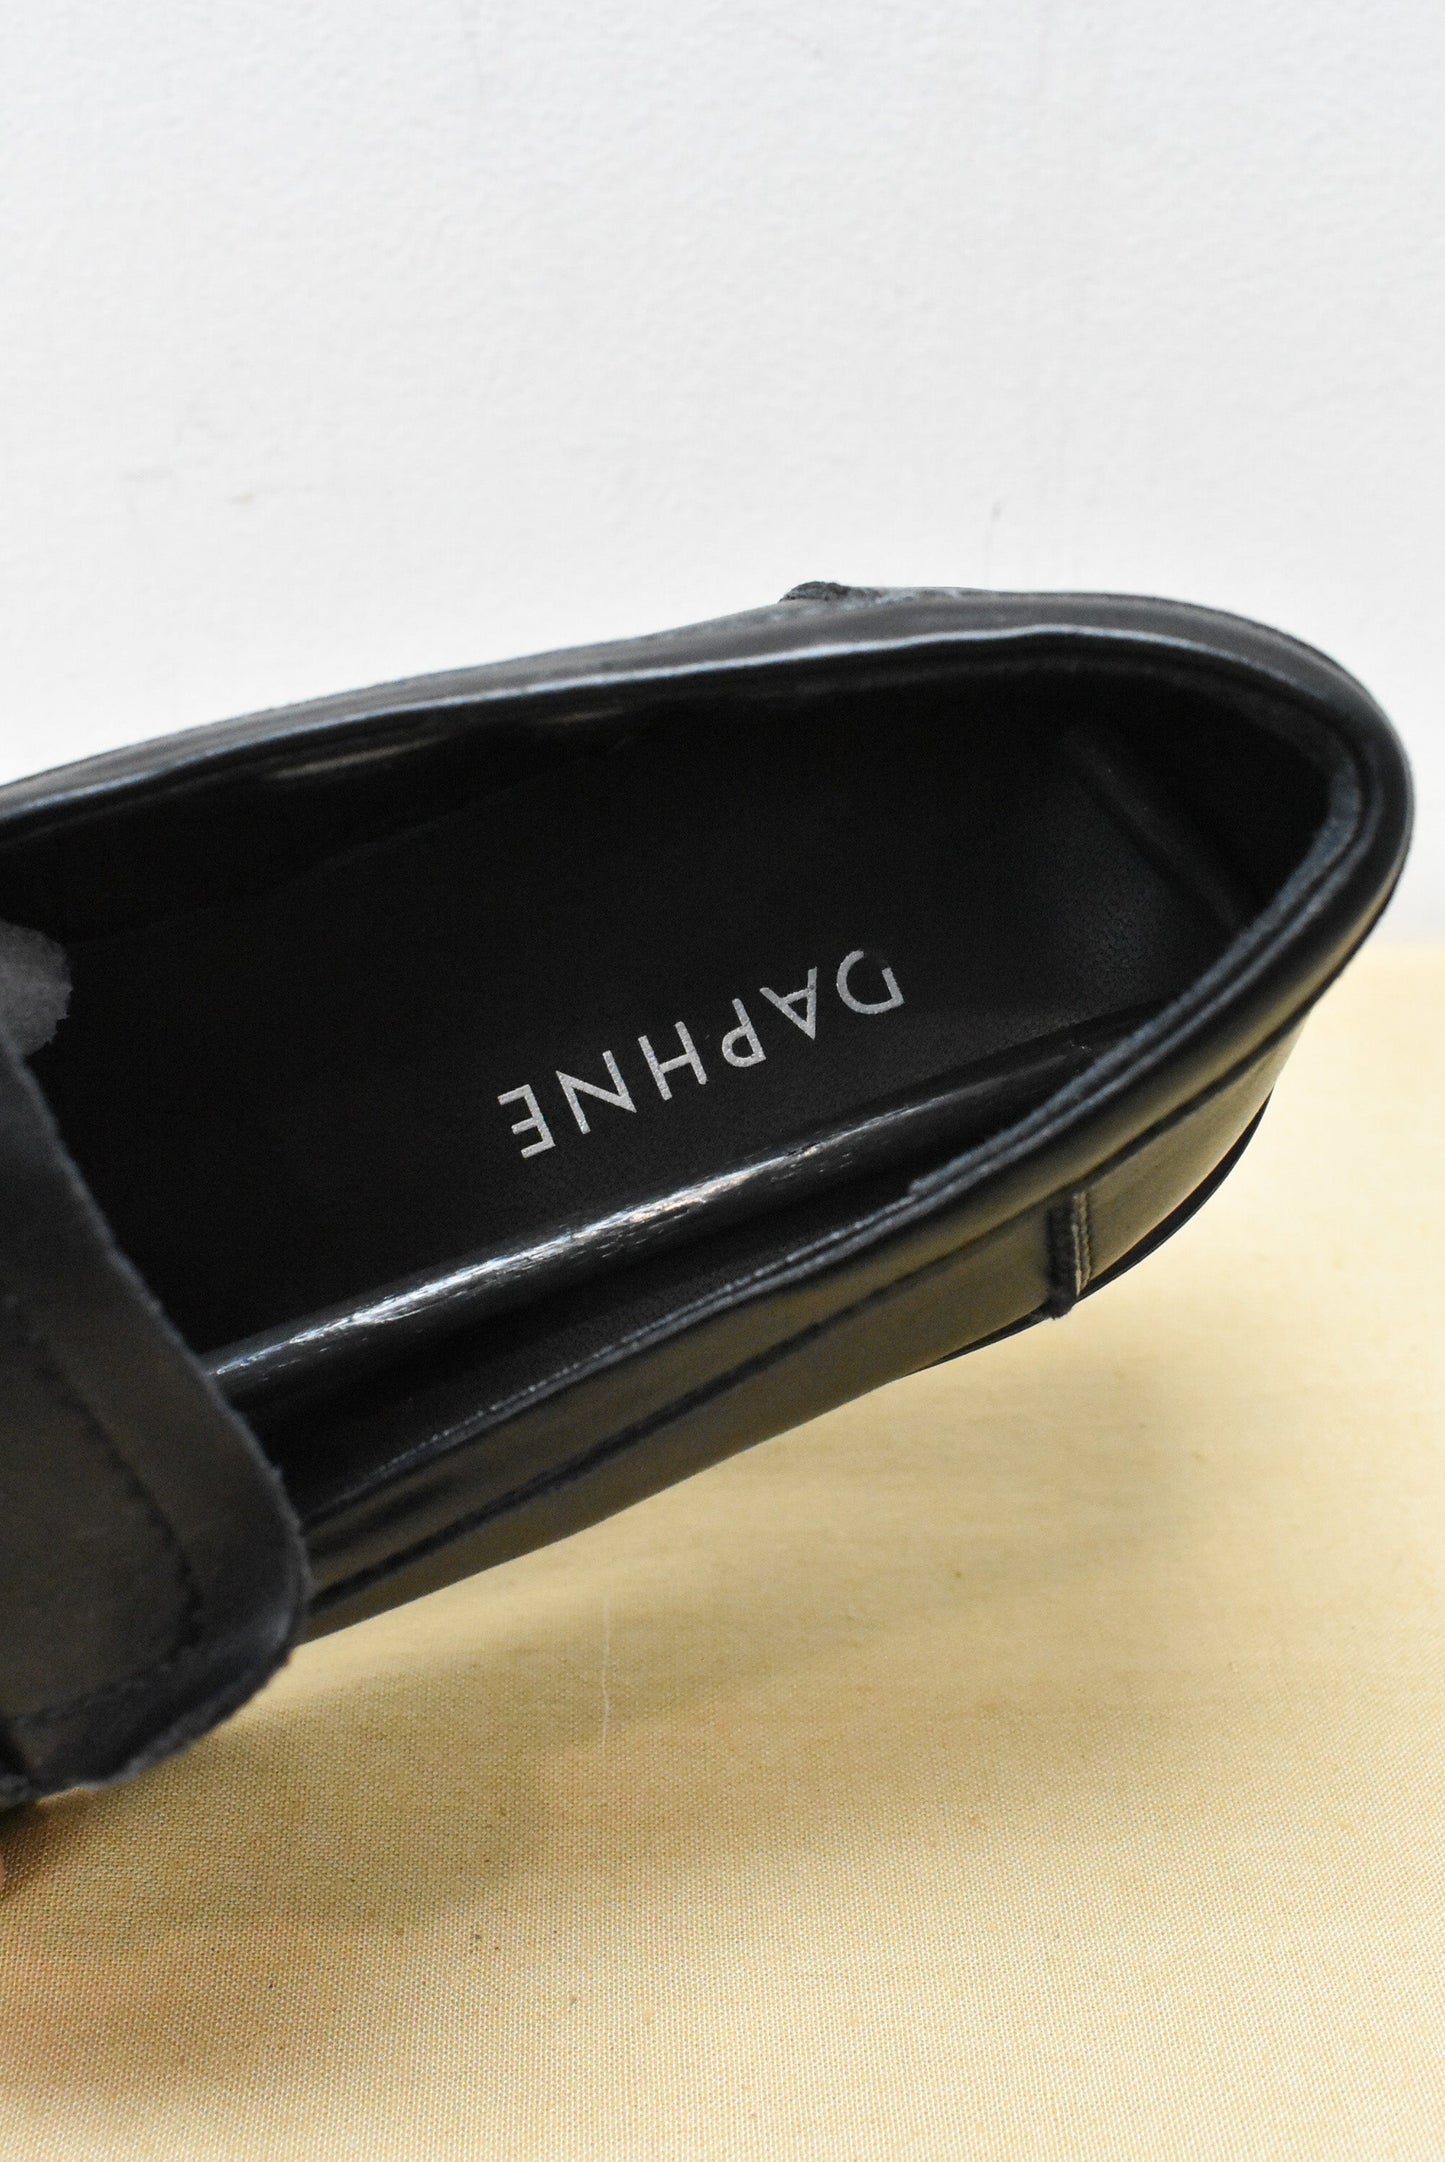 Daphne Black Loafers with gold hardware, 5.5